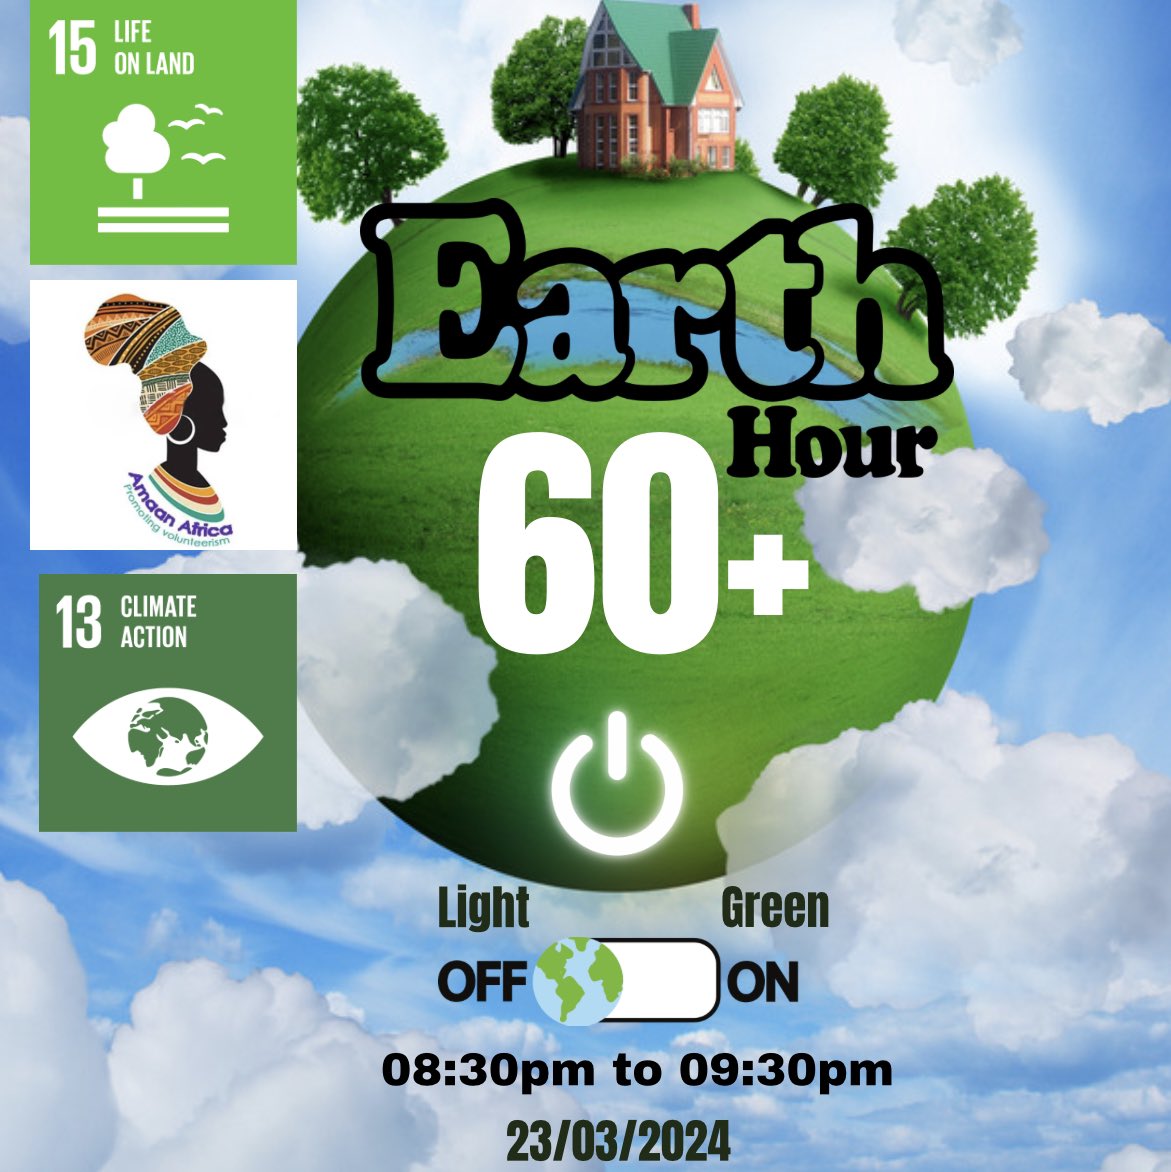 #earthhour #greenon #lightoff #switchoffforearth #climateaction #climatechange #advocacy #sdg13 #sdg15 #amaanafrica #africa #cameroon #wwf #humanity #earth #motherearth #green #planet #ourplanet